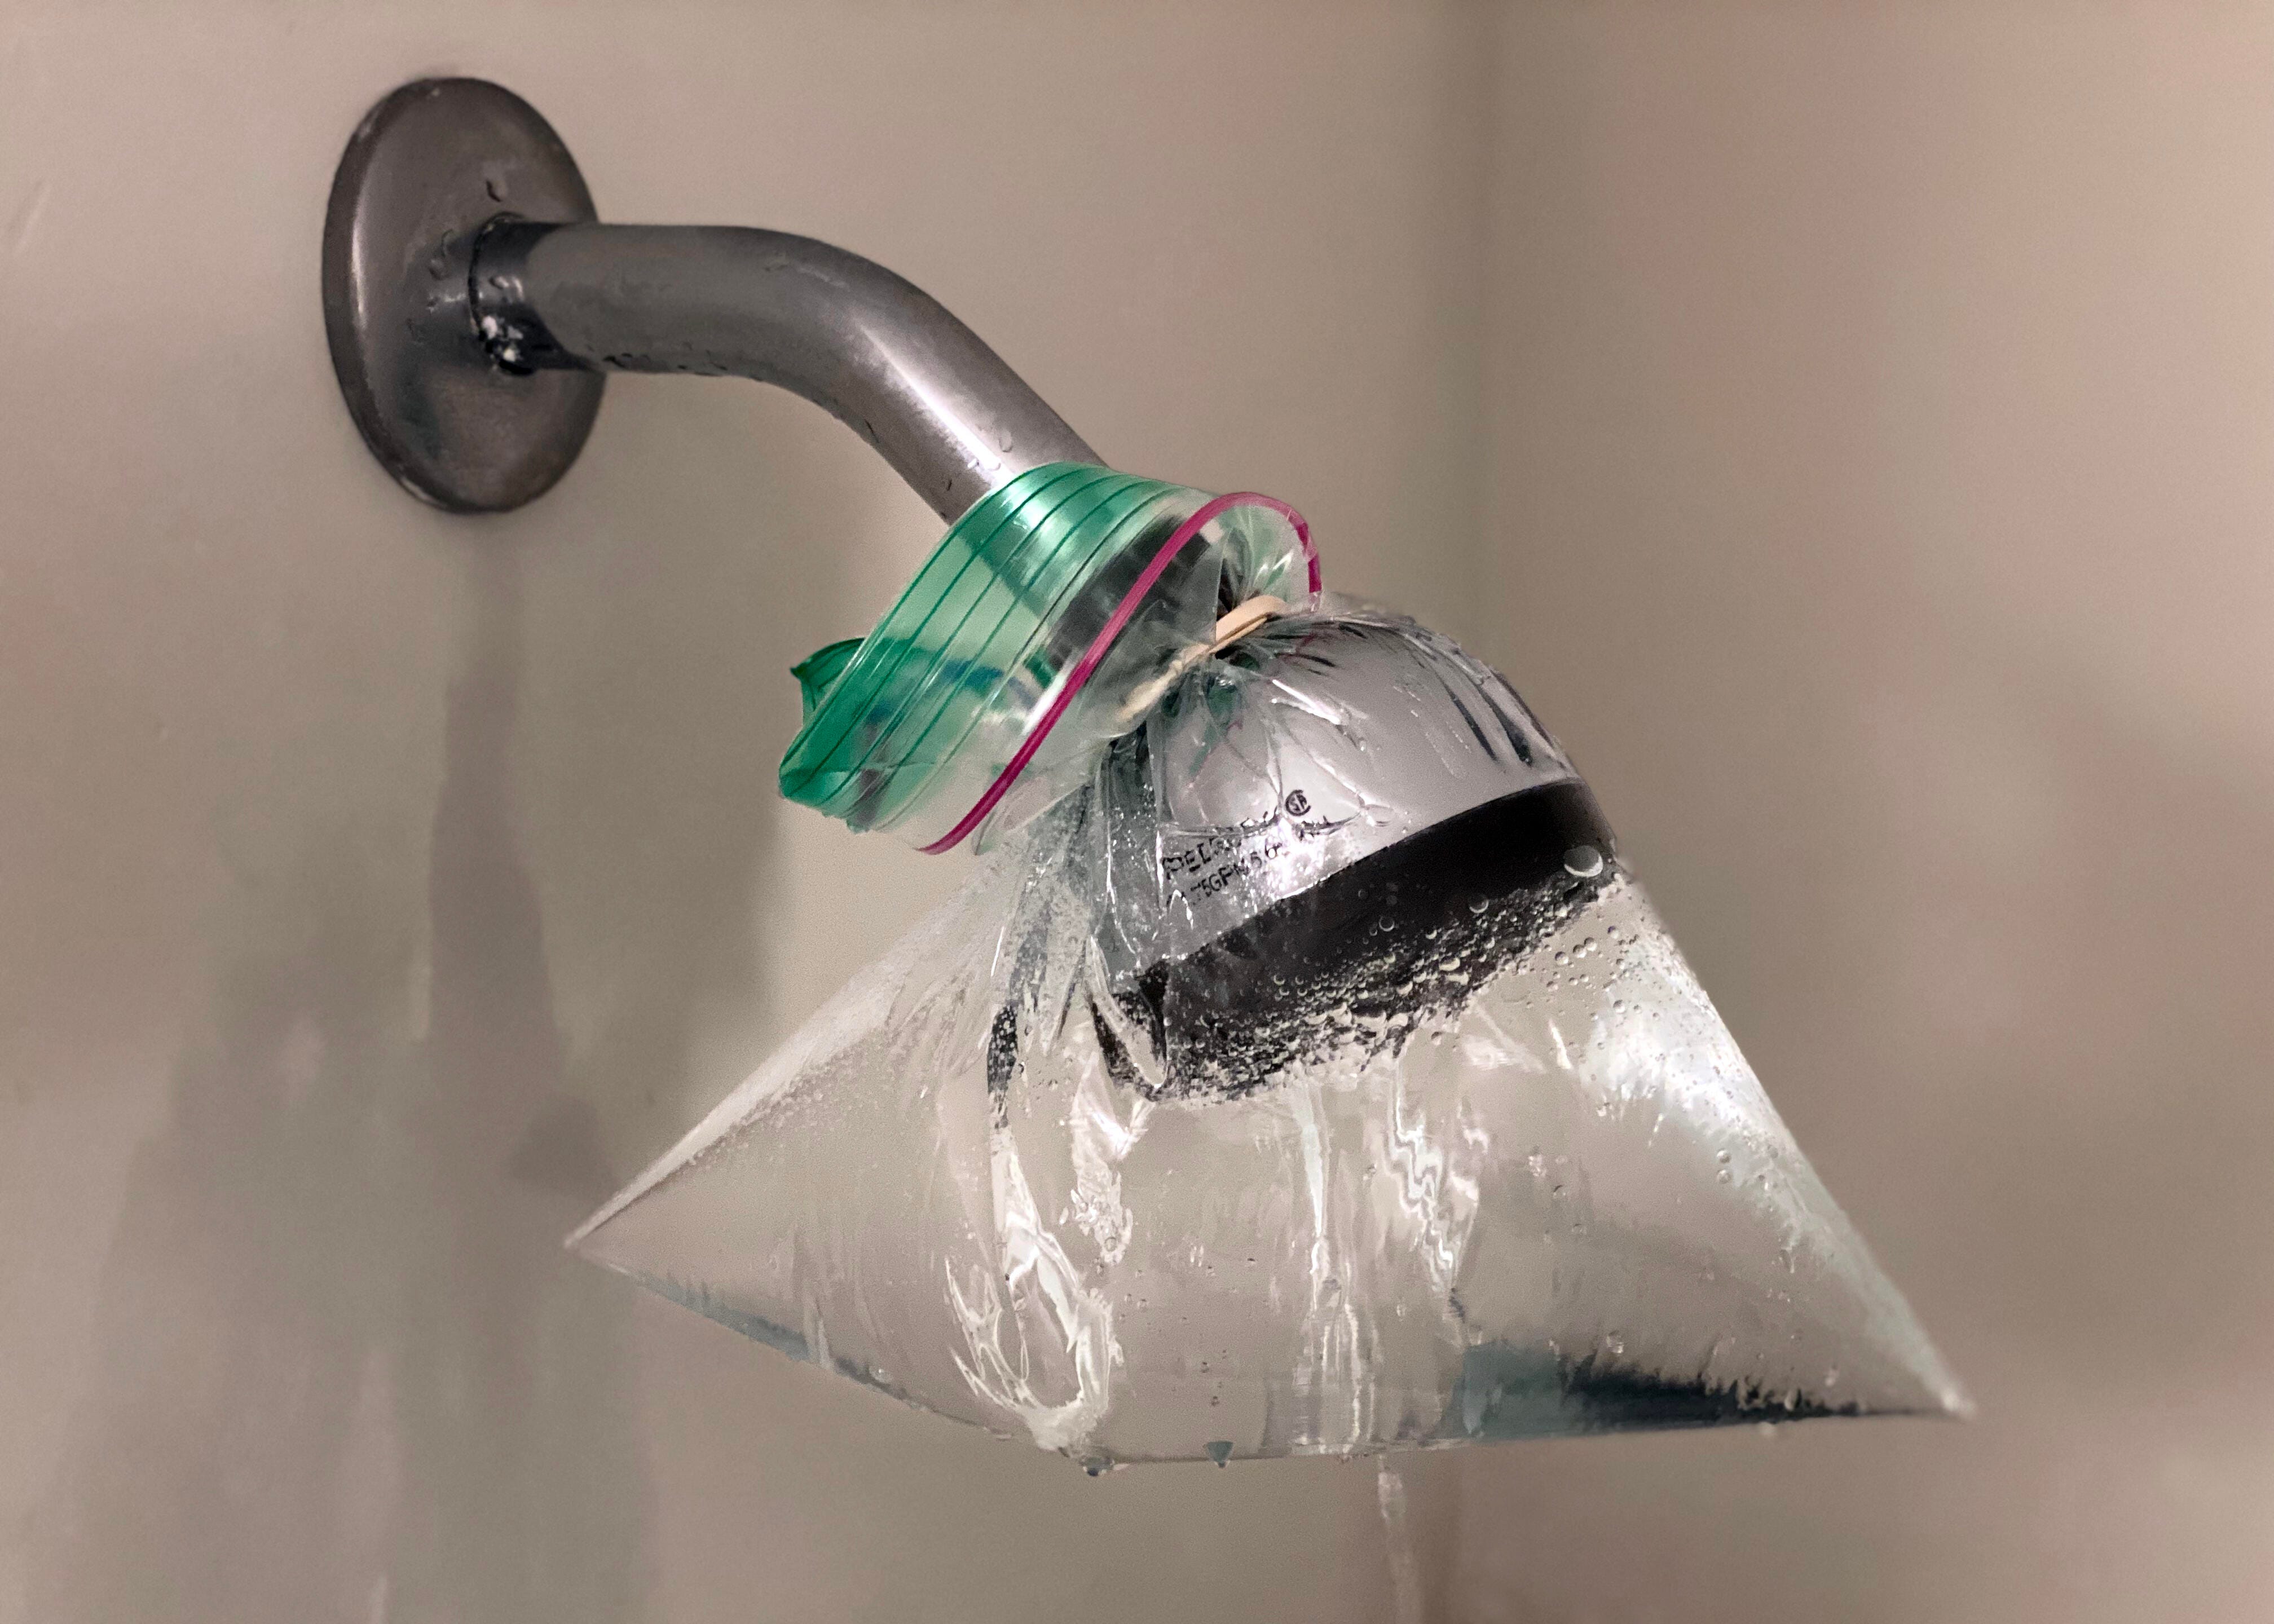 A showerhead with a bag around it.